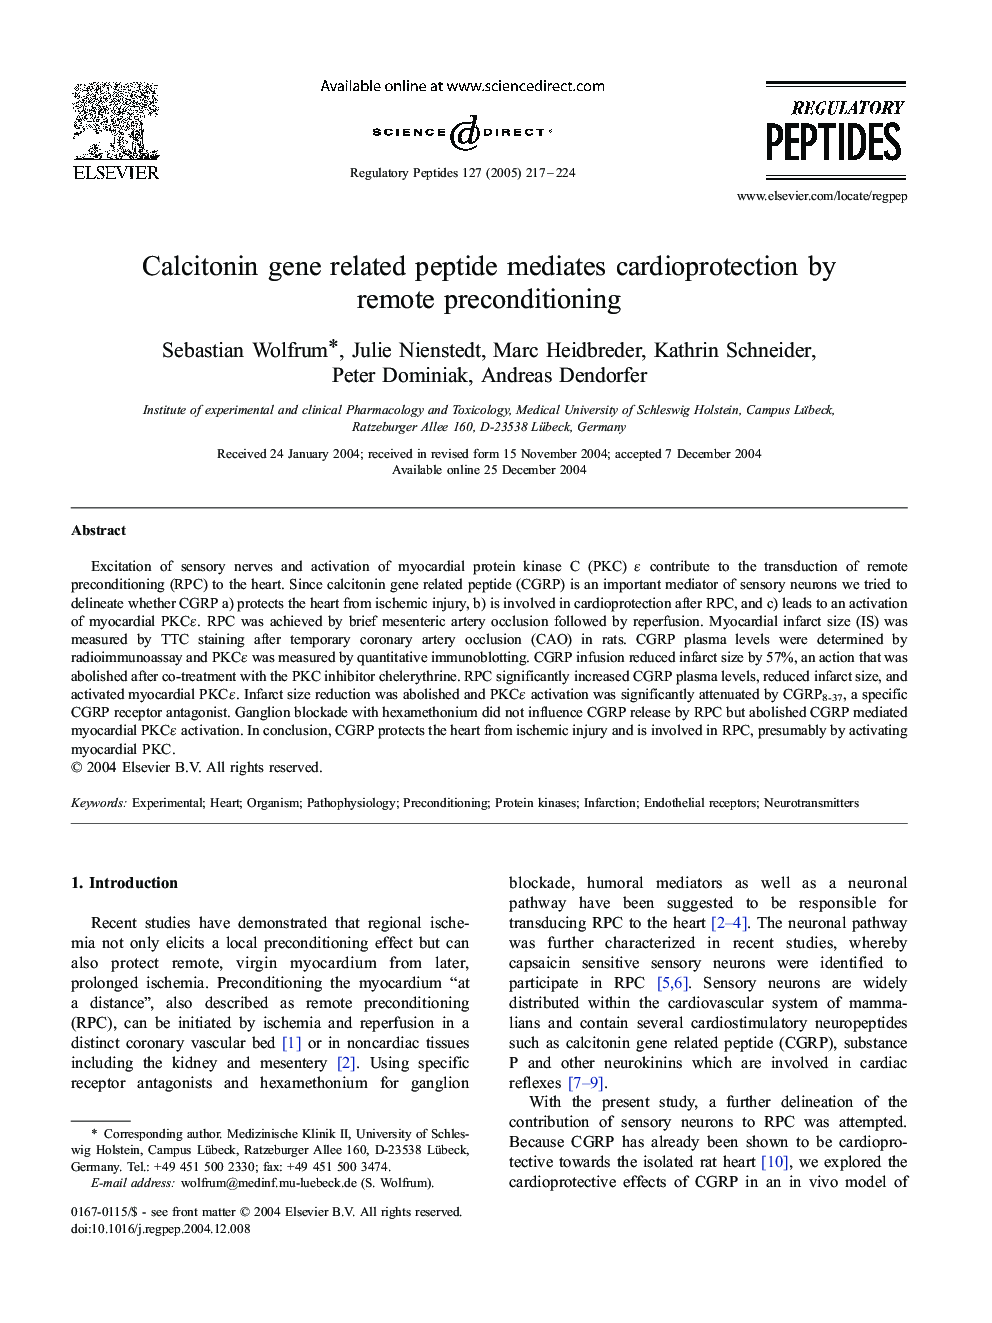 Calcitonin gene related peptide mediates cardioprotection by remote preconditioning